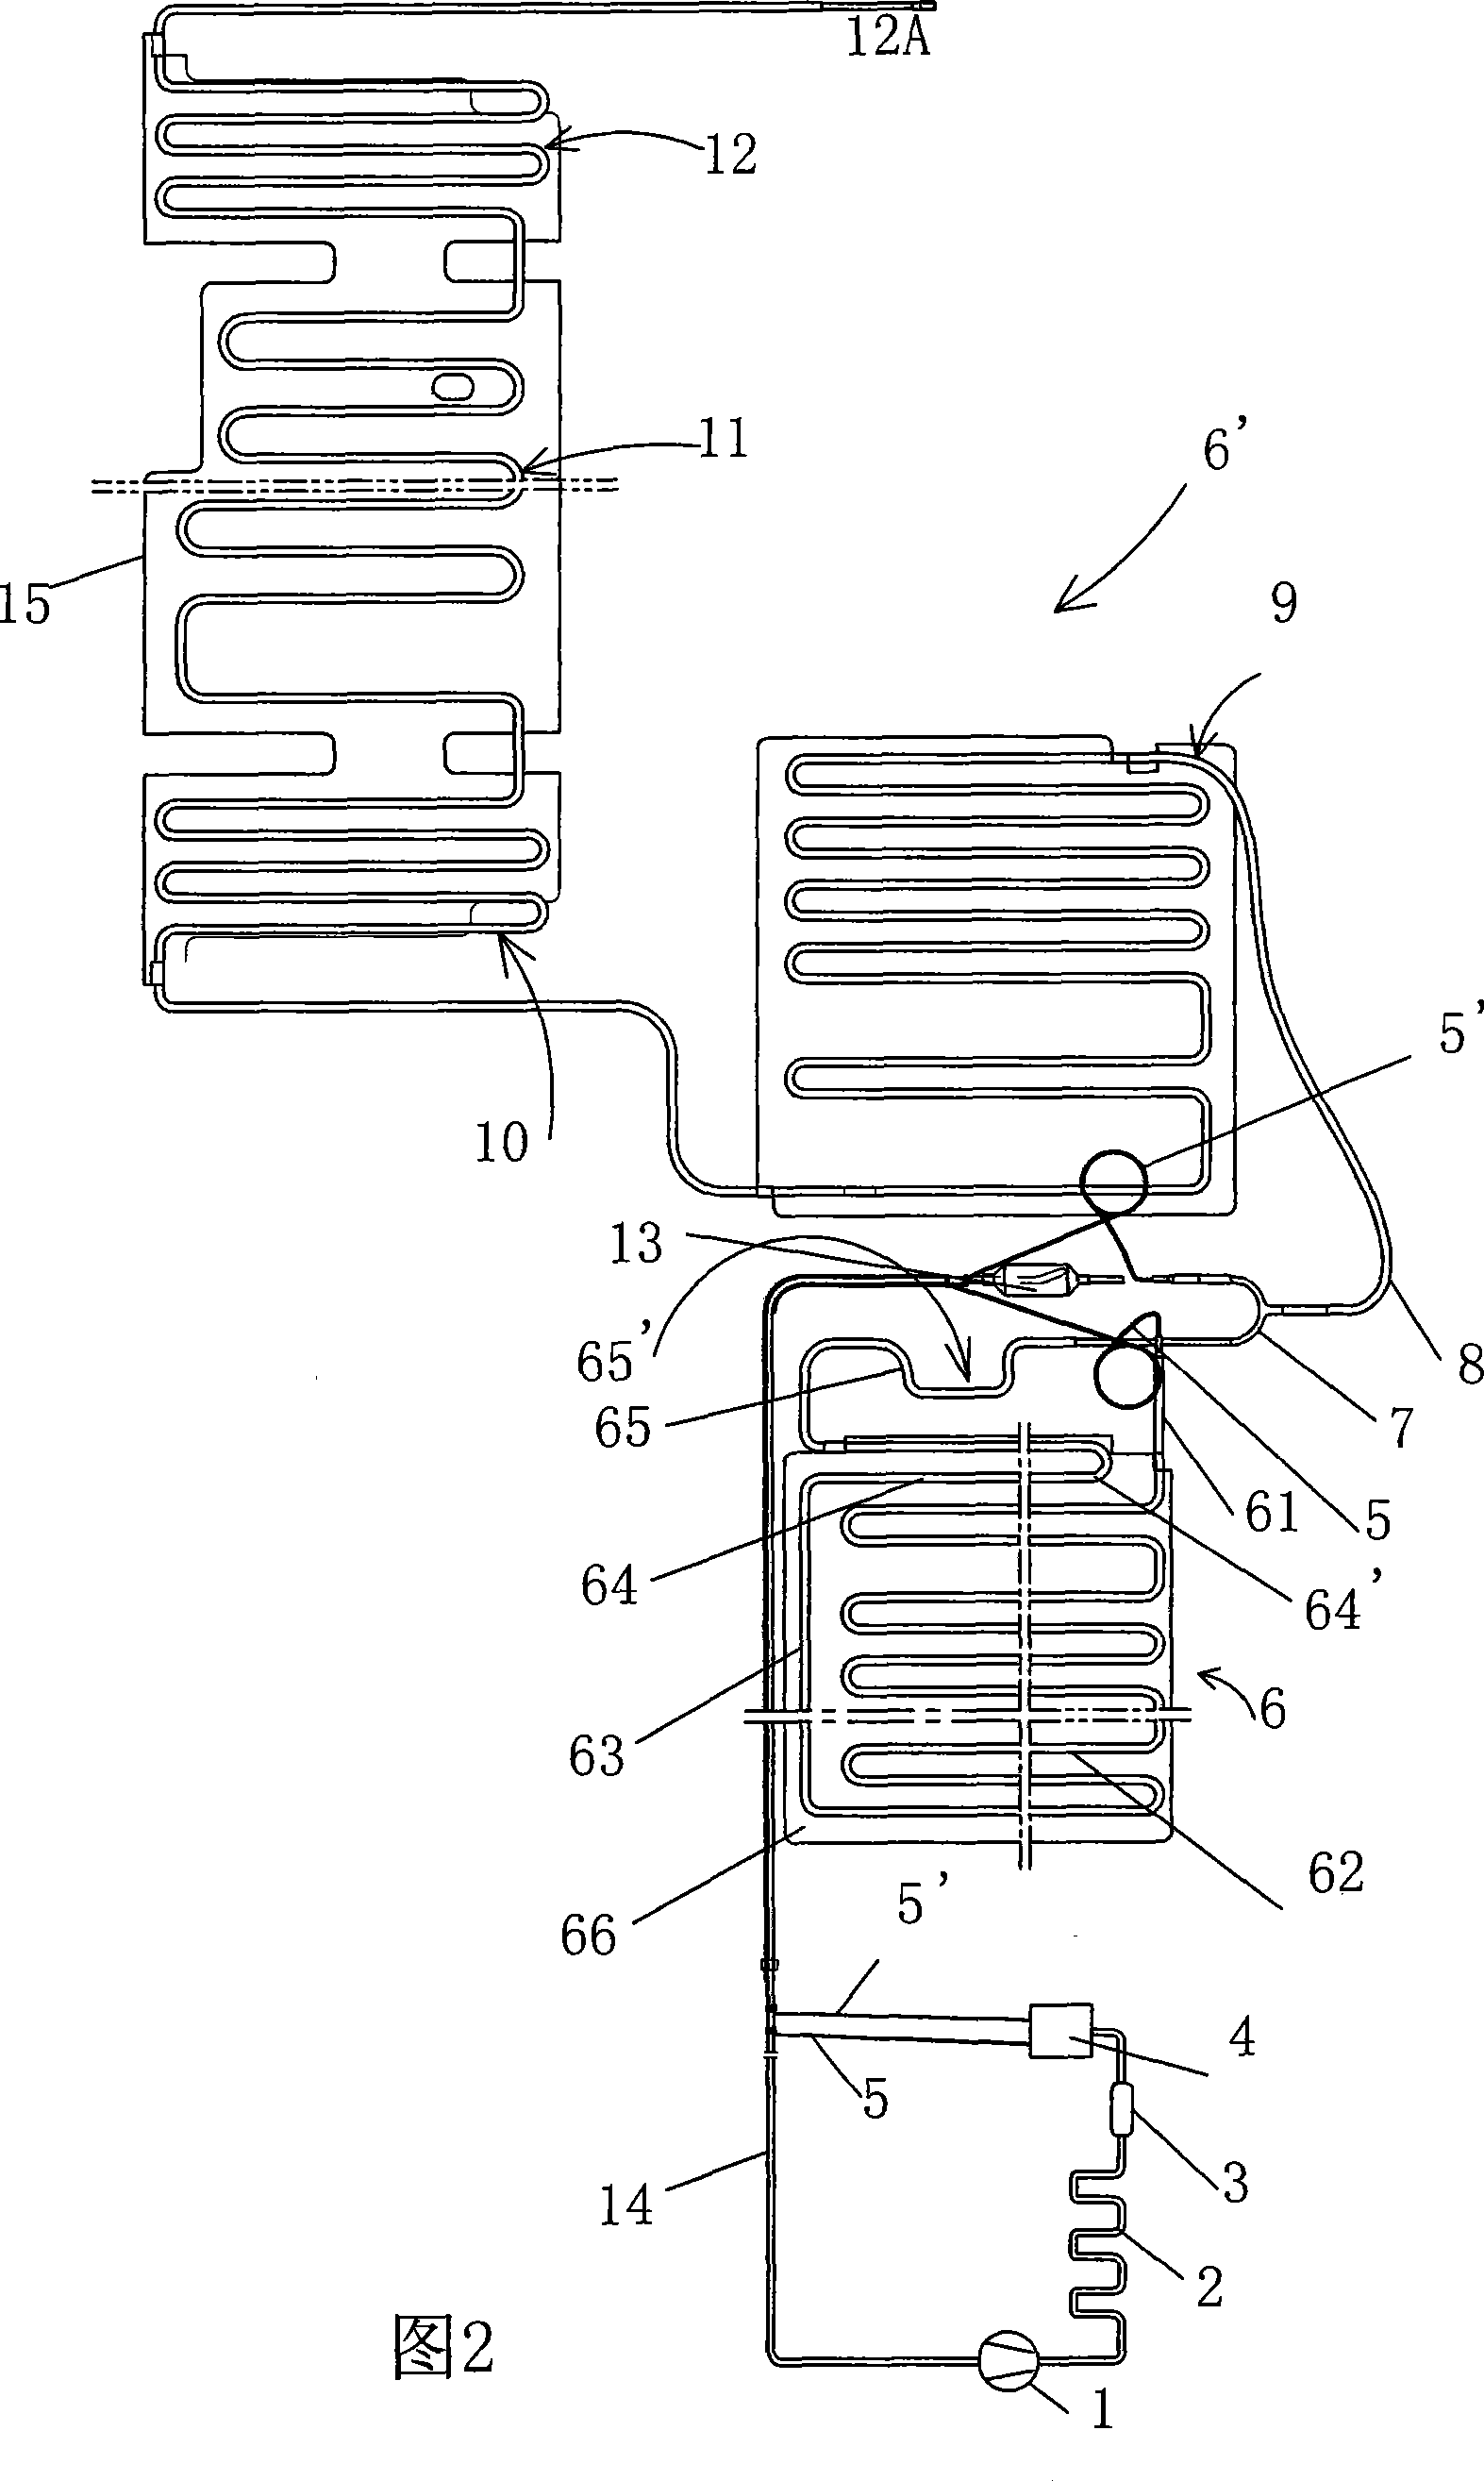 Direct freezing double-system double door refrigerator with freezing chamber at upper part